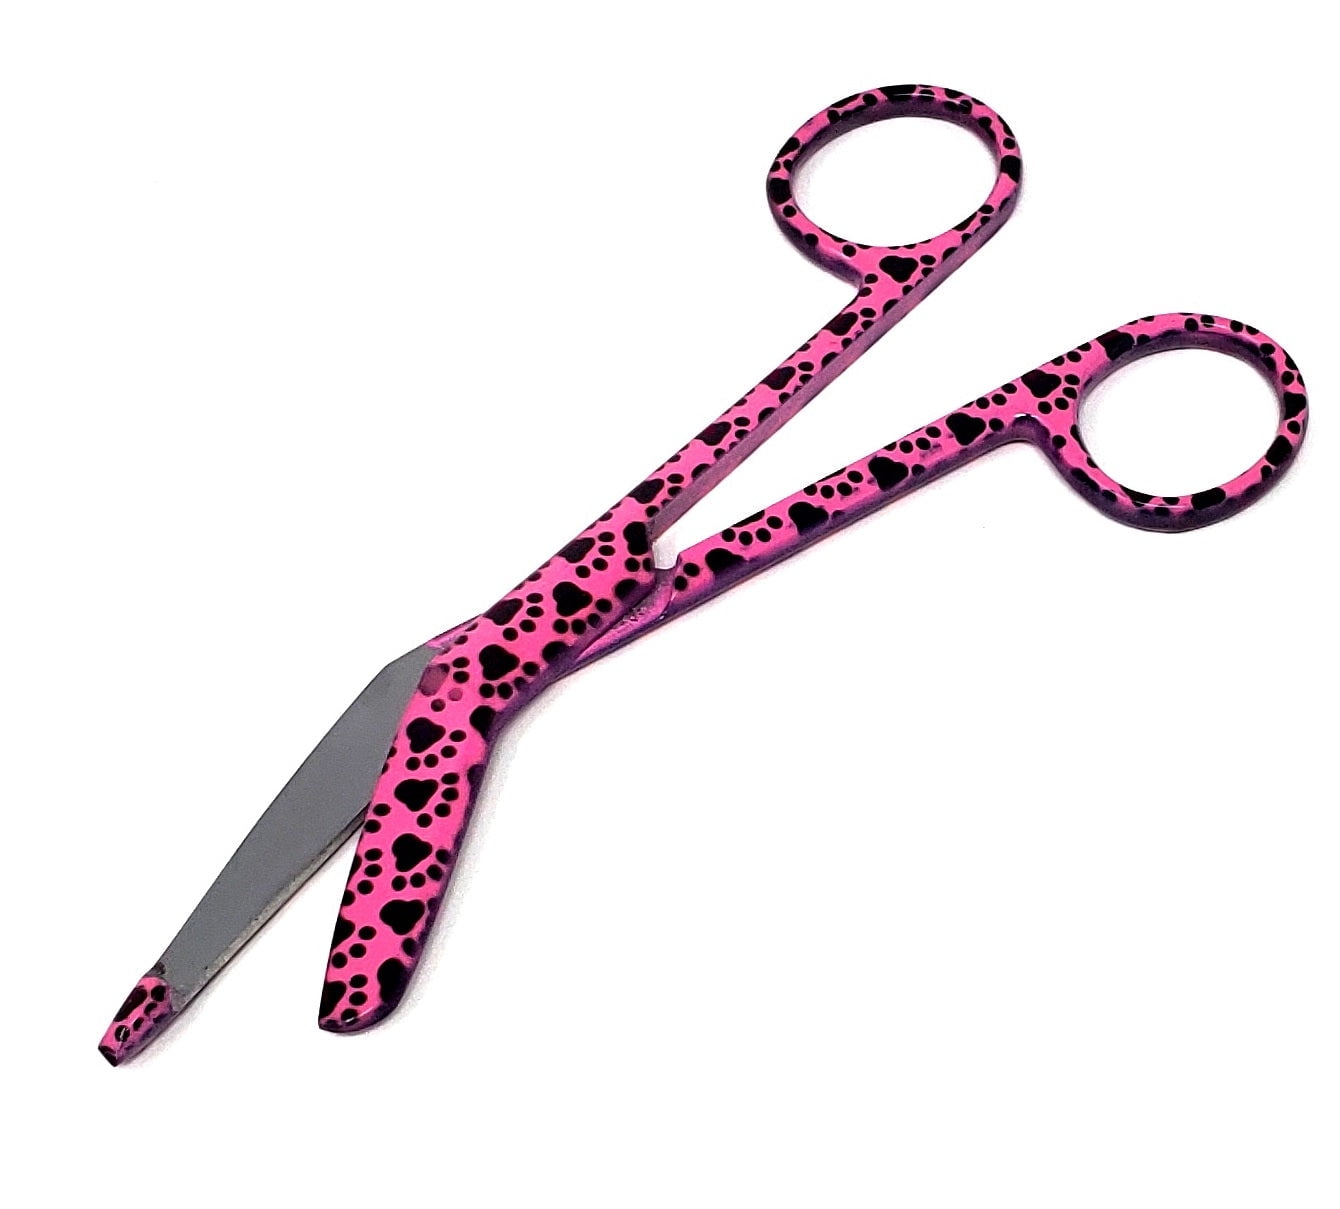 Ceramic Scissors,Healthy Baby Food Scissors with Cover Portable Shears  (Pink)